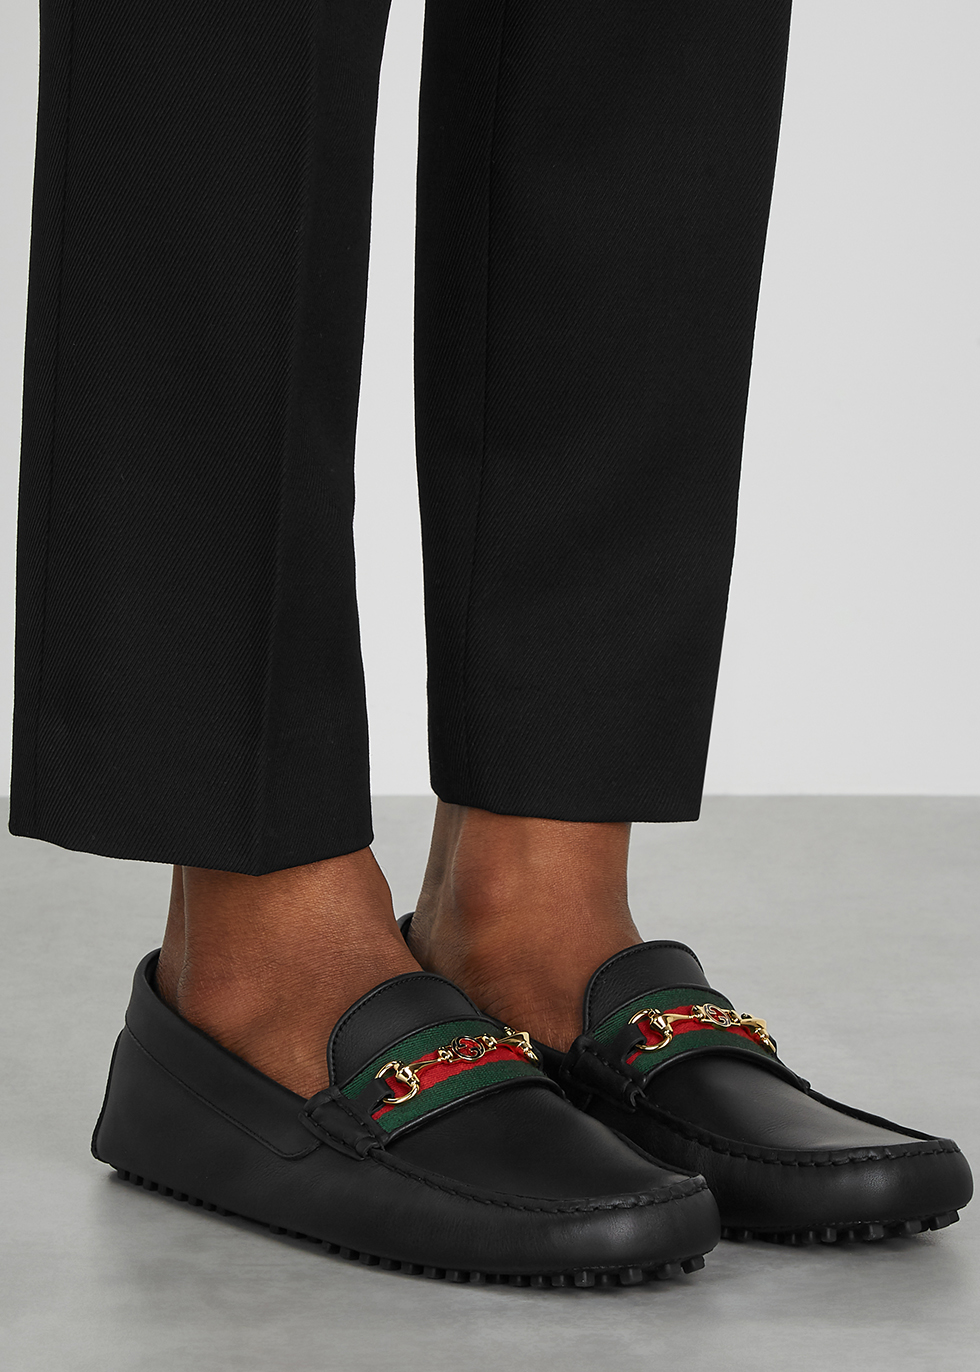 gucci driving shoes